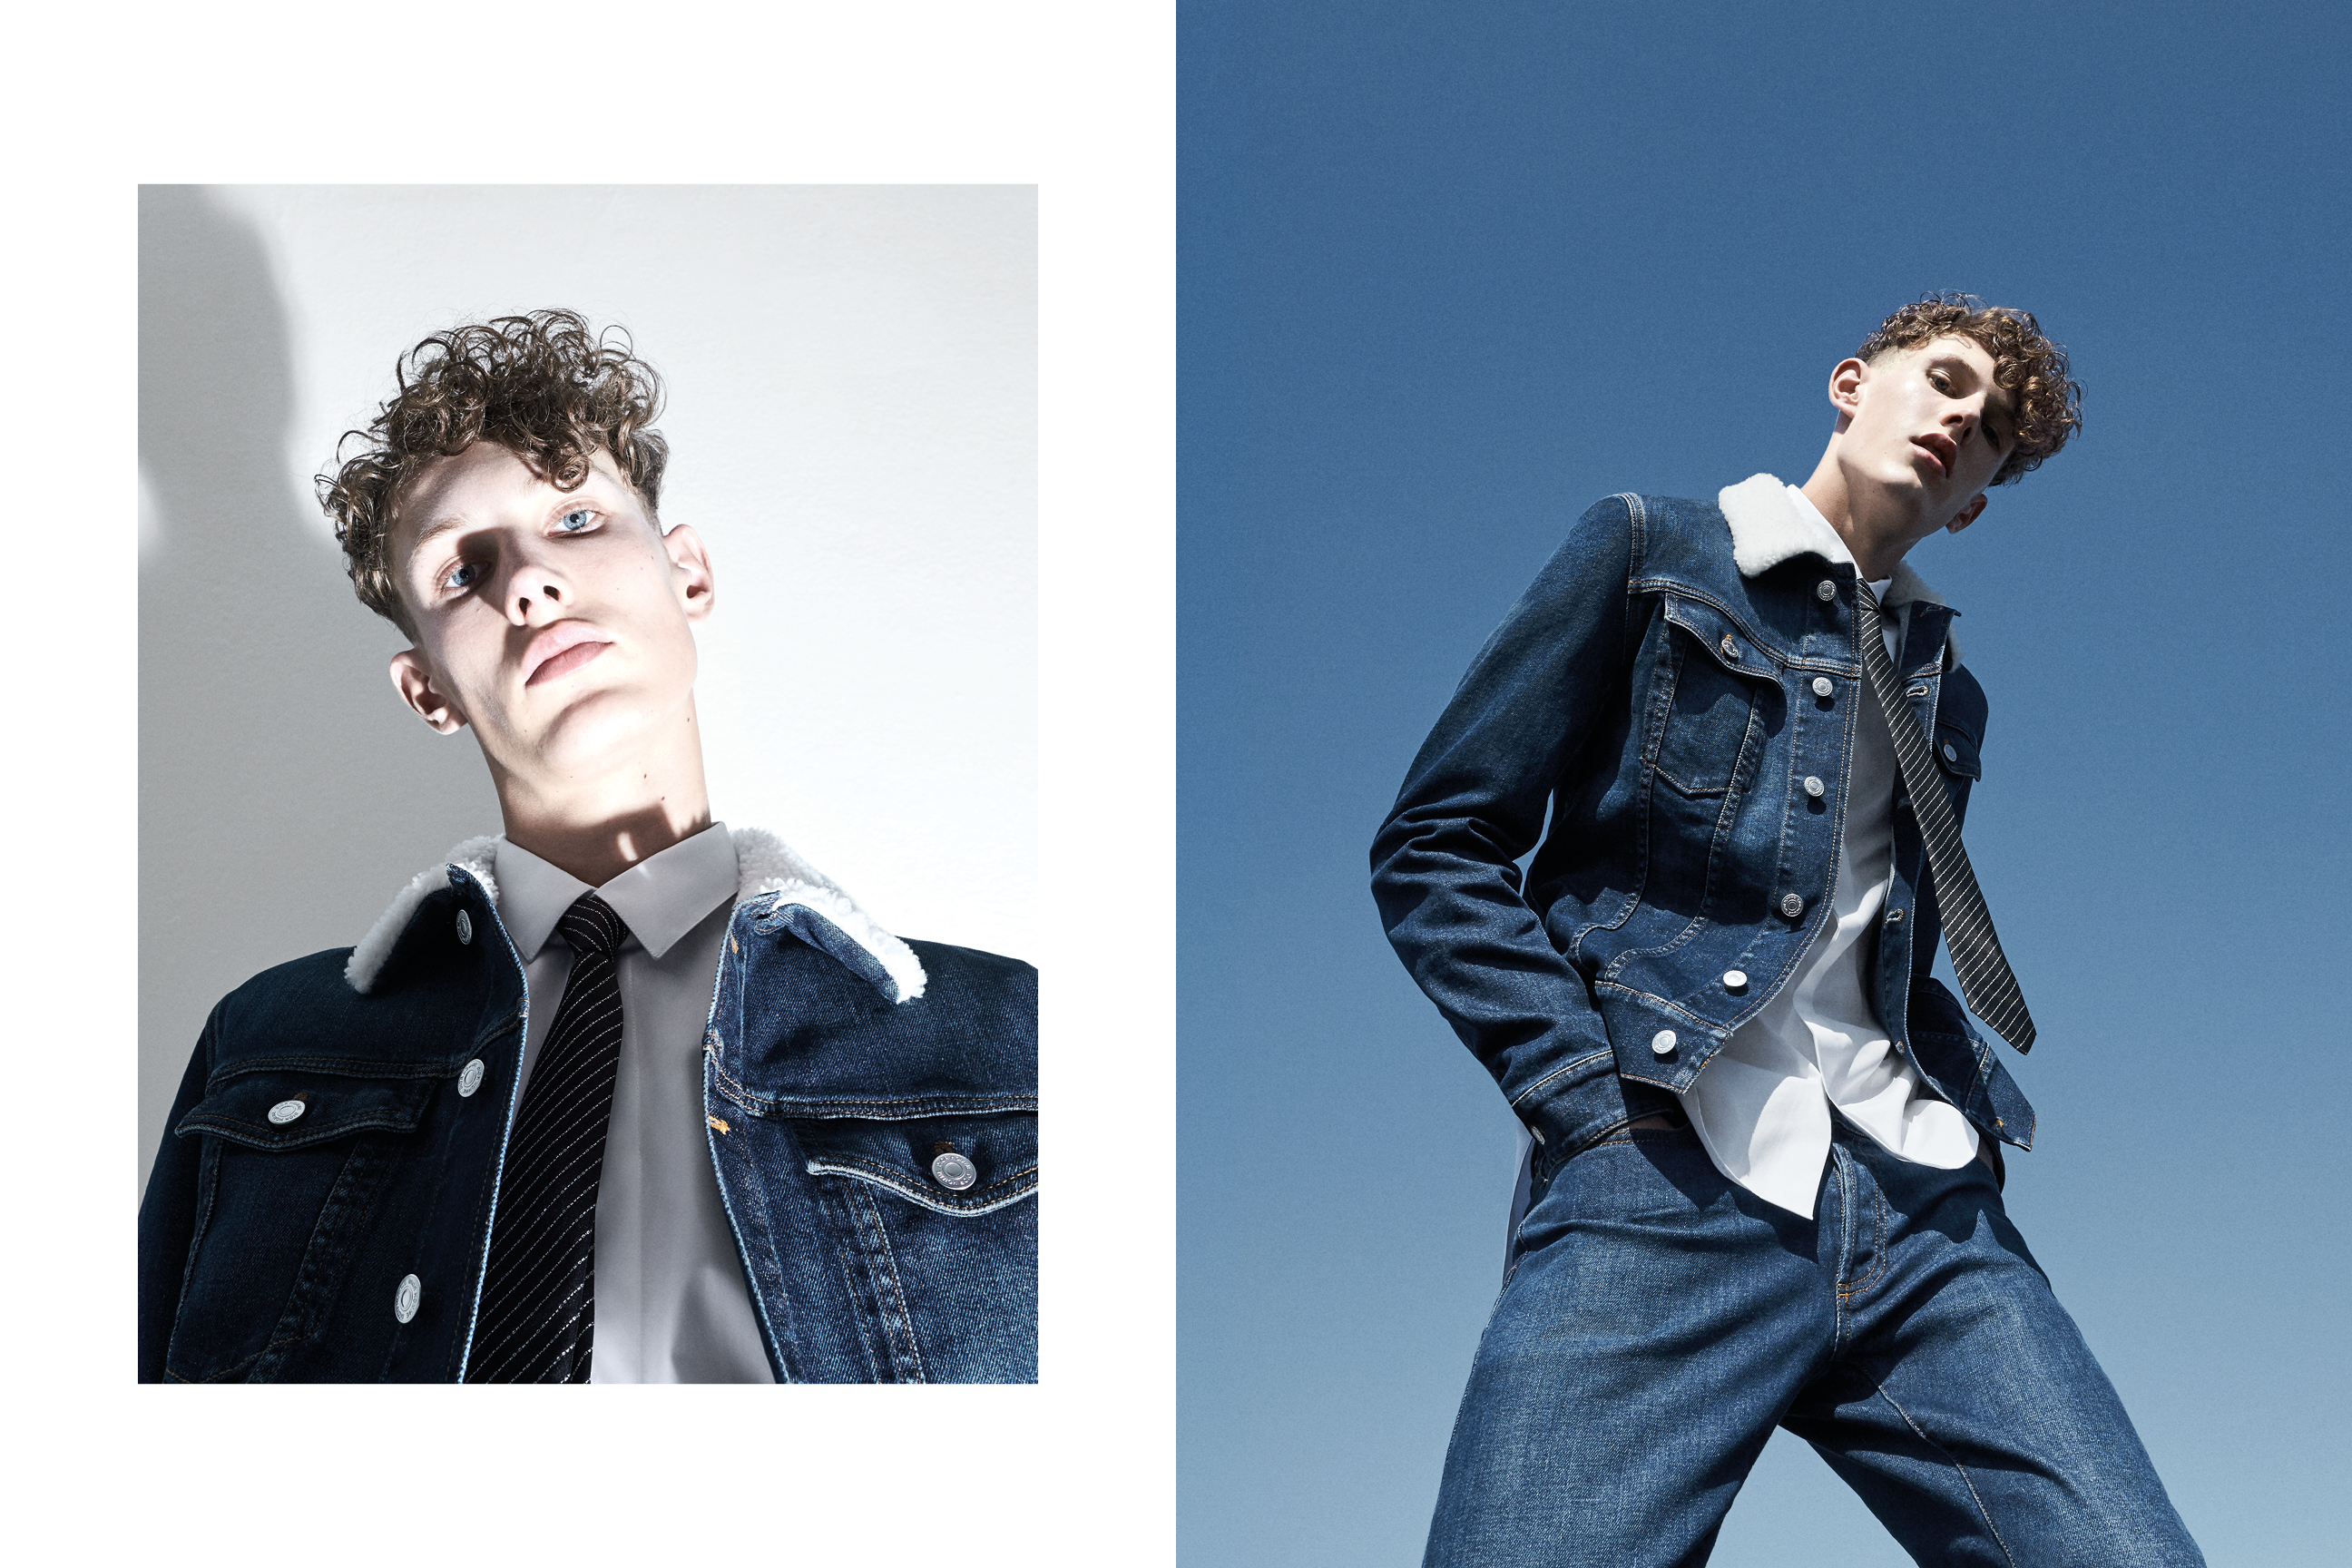 DIOR DENIM STYLISME BY MAURICIO NARDI PICTURE BY ALESSIO BOLZONI FOR DIOR HOMME_3